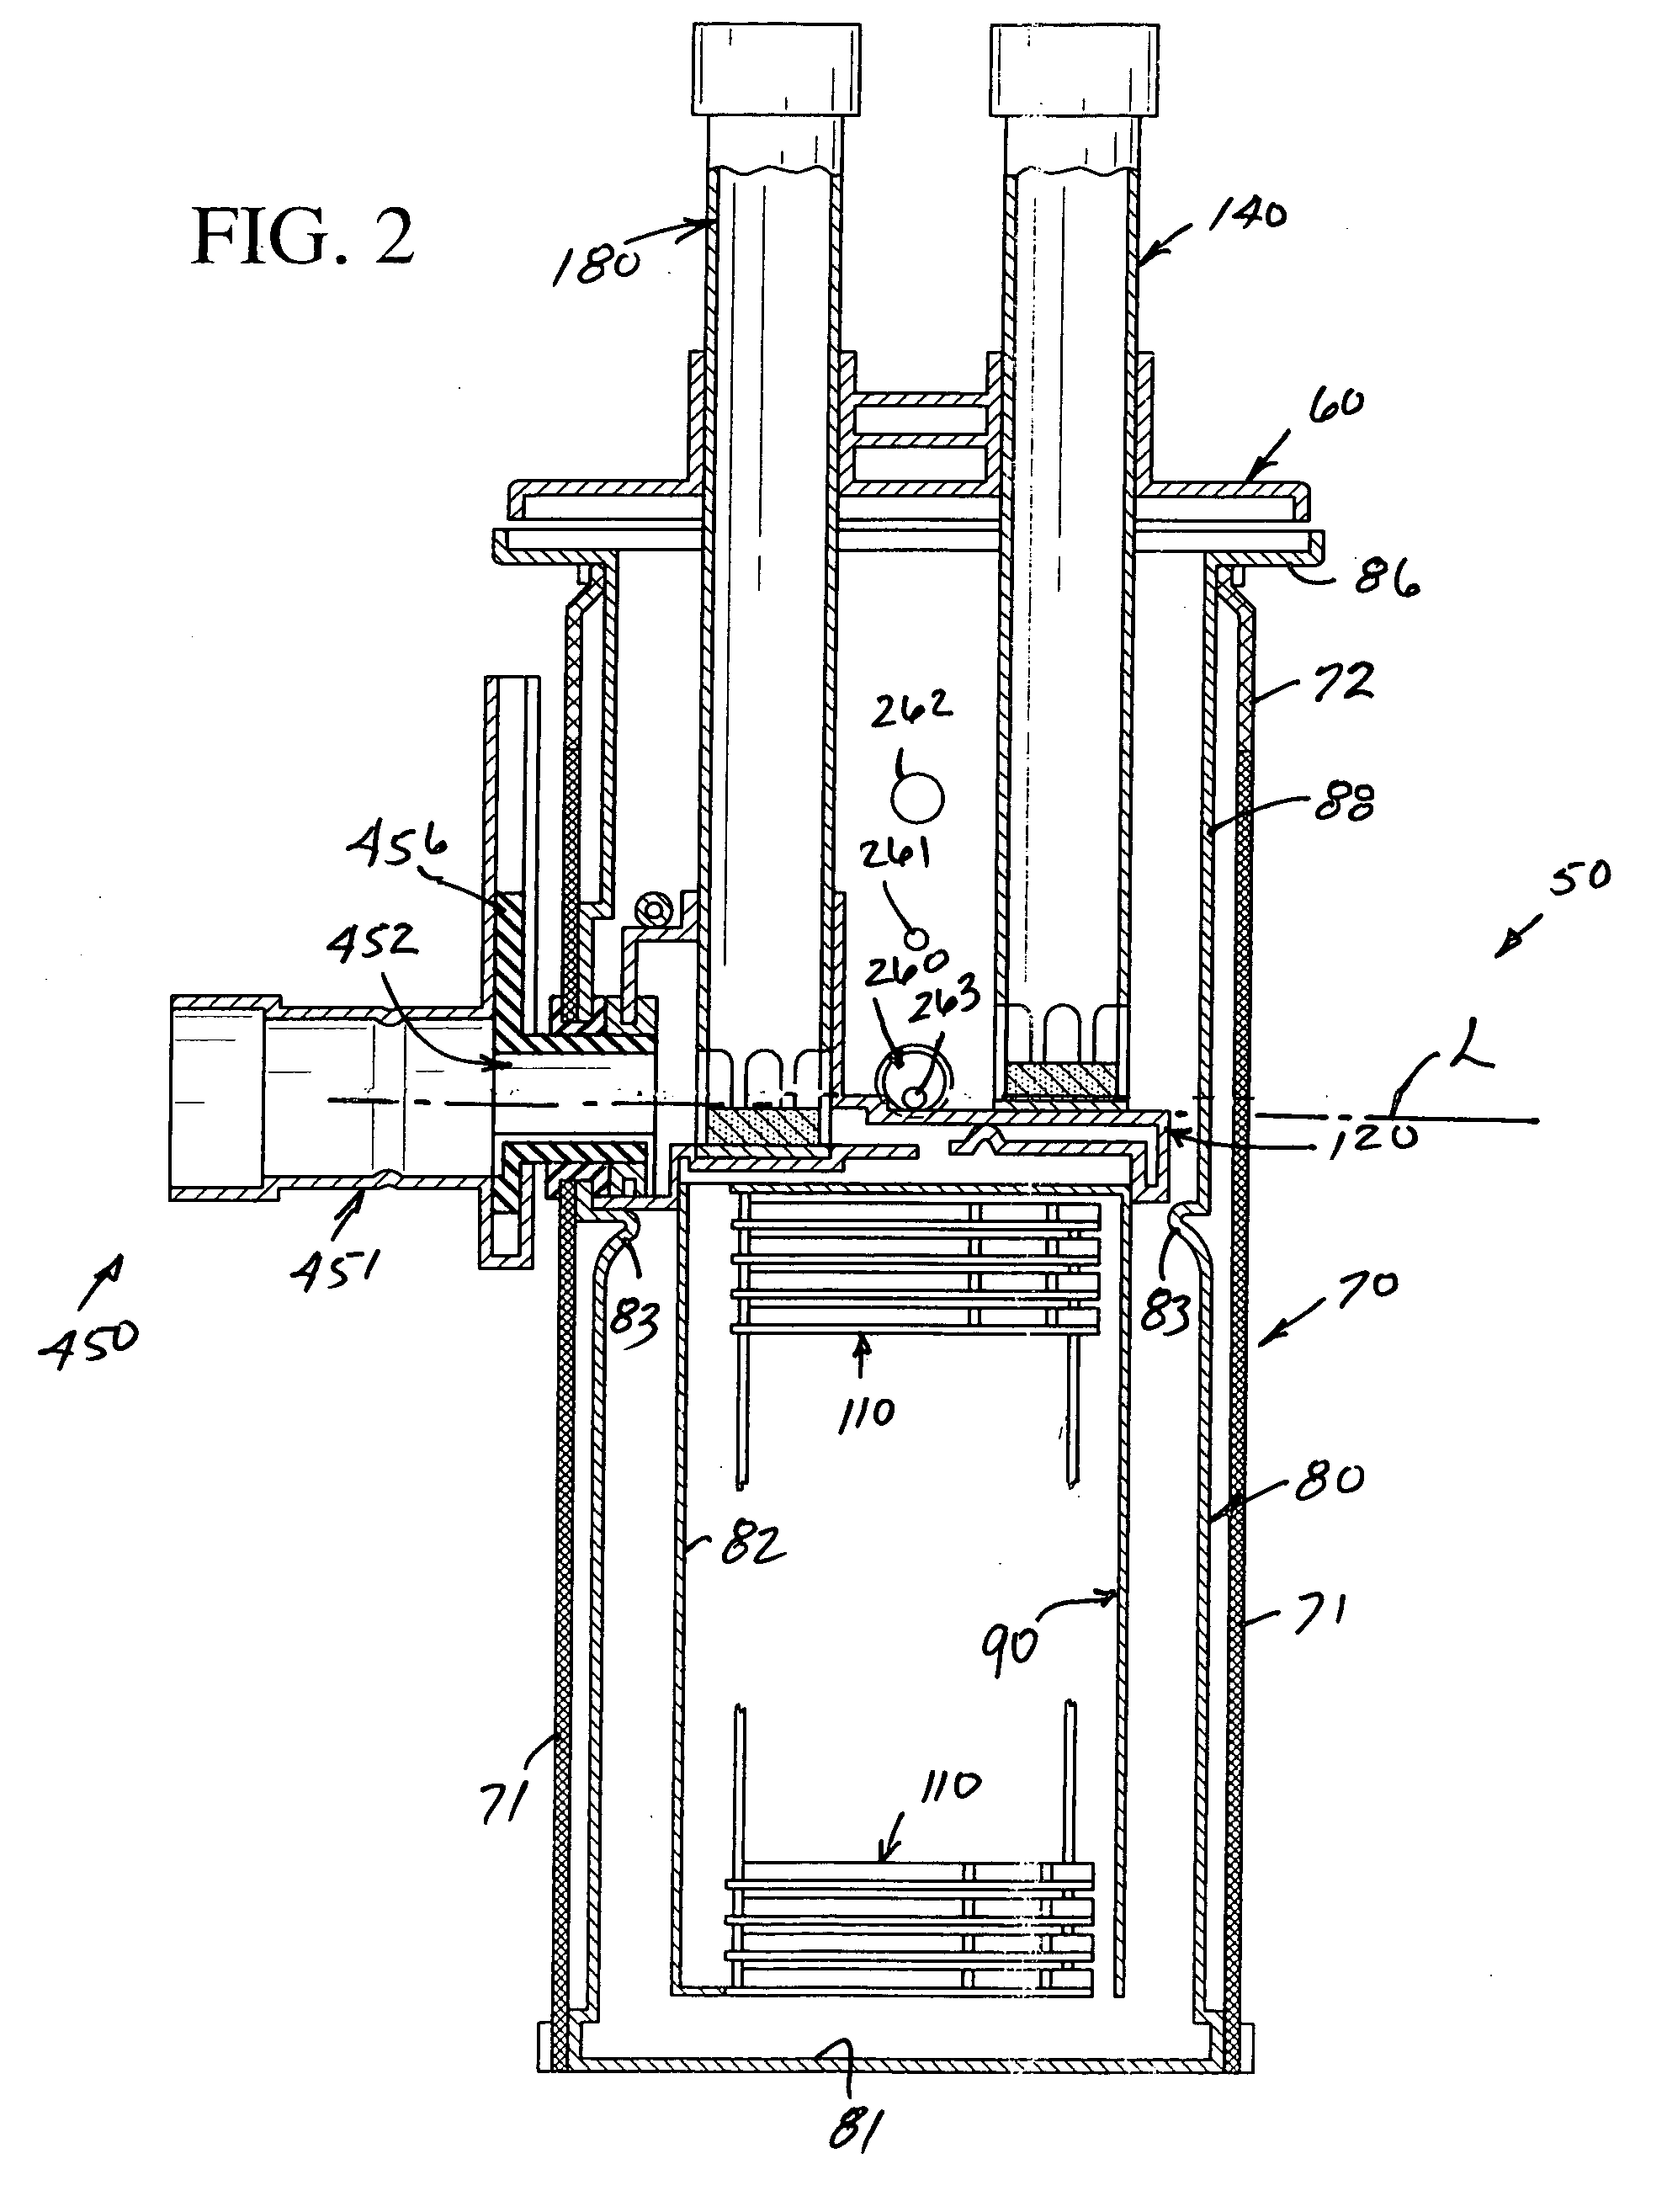 Wastewater flow equalization system and method